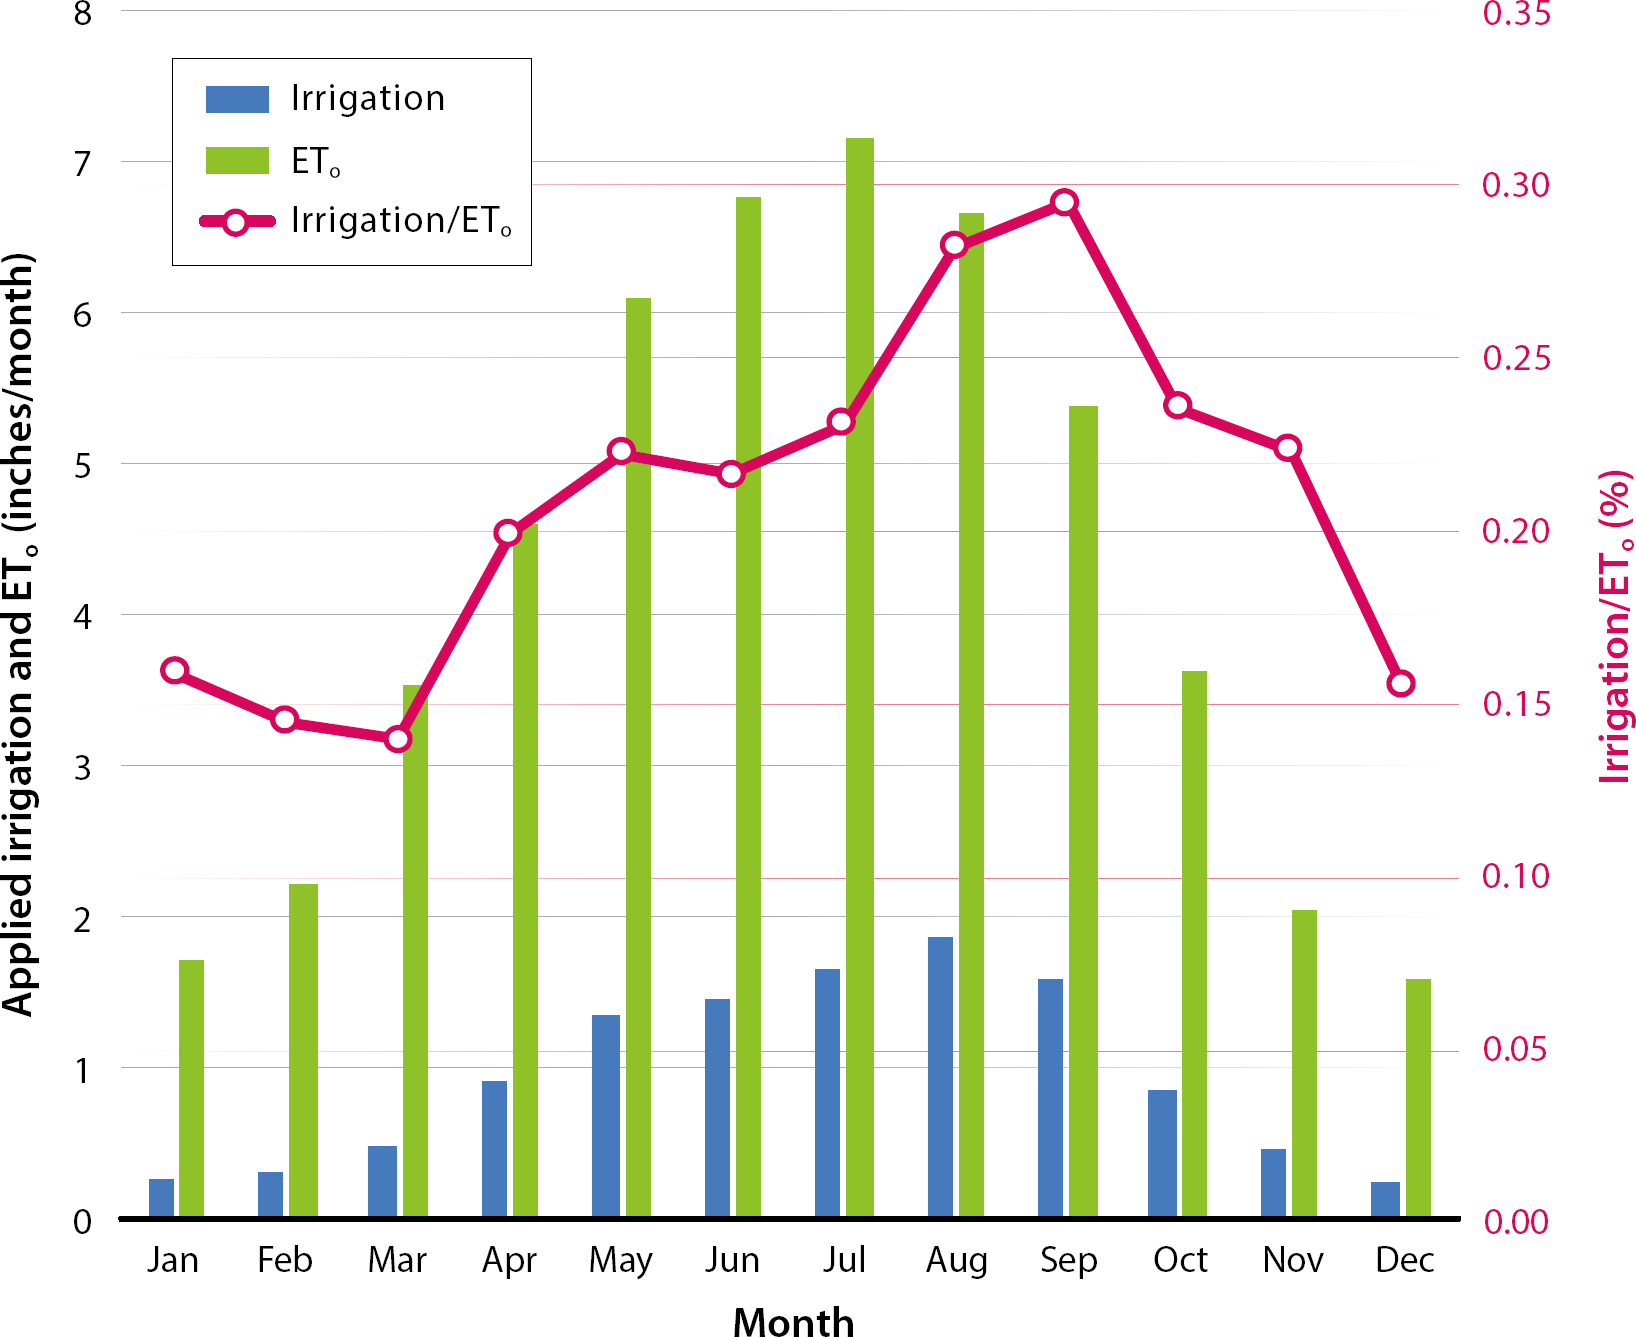 The average monthly irrigation compared to the average monthly ETo over the 4-year period.